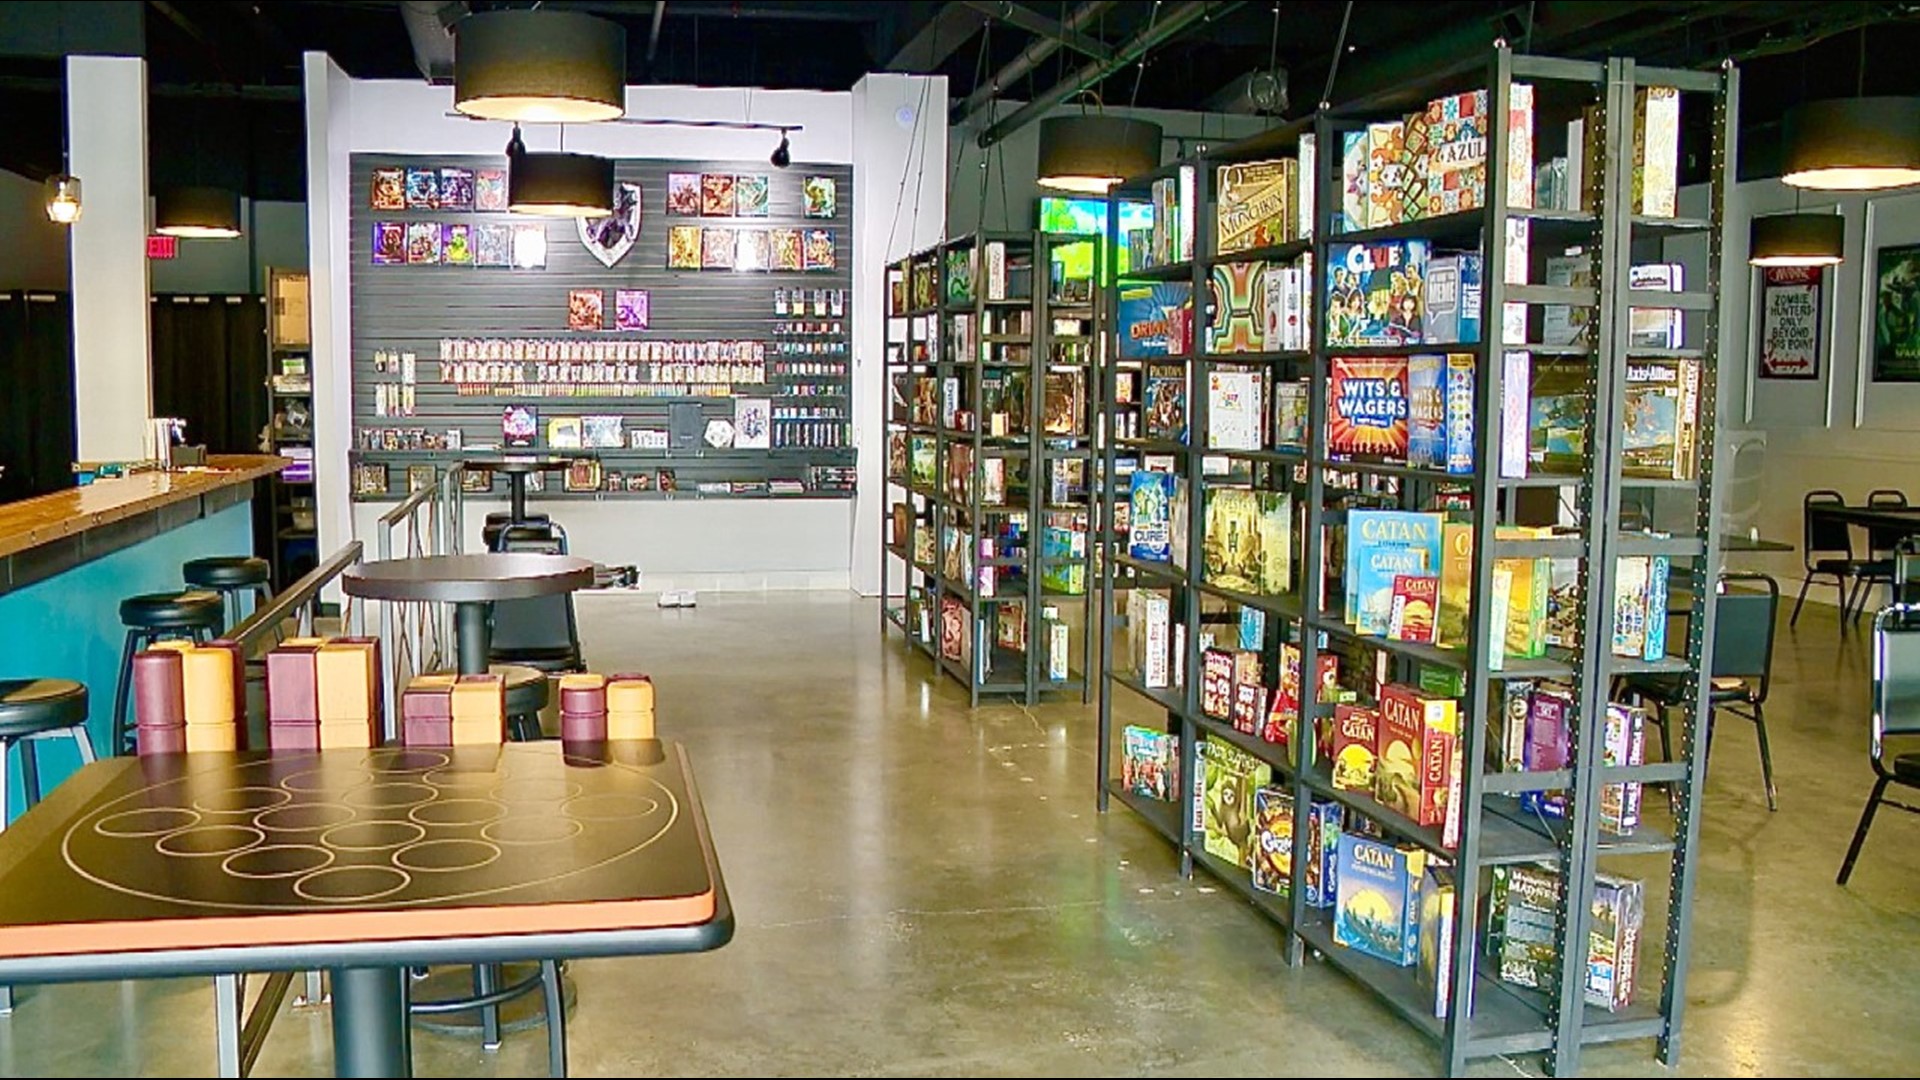 Thanks to the sales, Moonshot Games was able to reopen its Noblesville game shop — as well as open a new location downtown called “Moonshot on Mass Ave.”